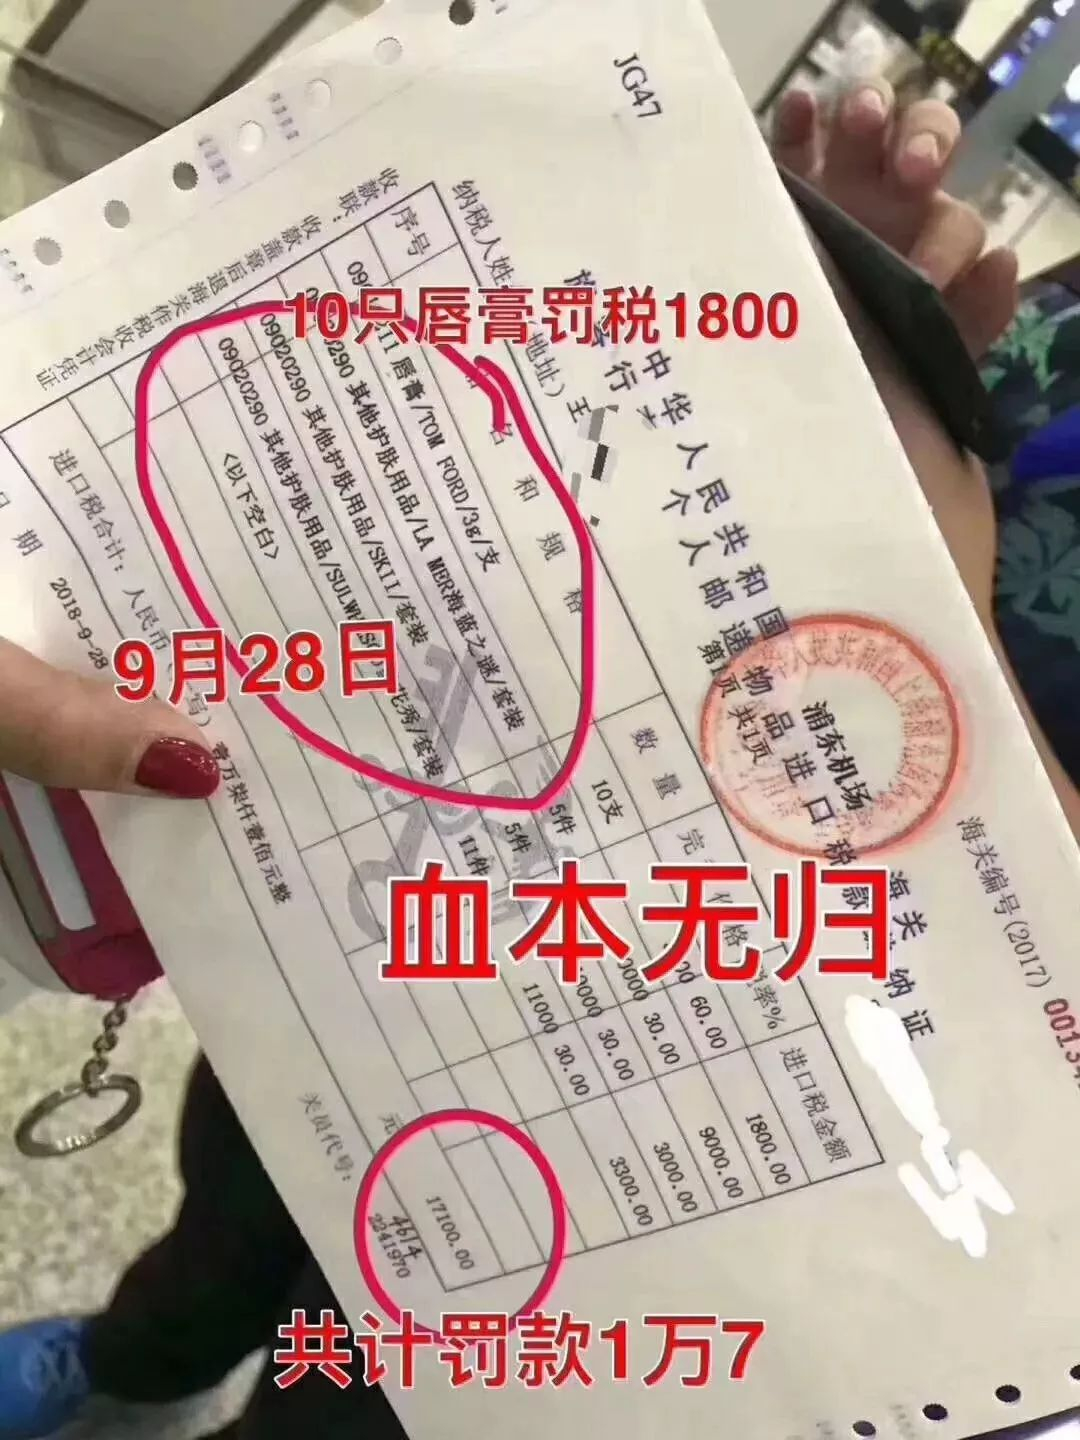 Falsely Authentic: Daigou Sellers Offering Counterfeits - Corsearch